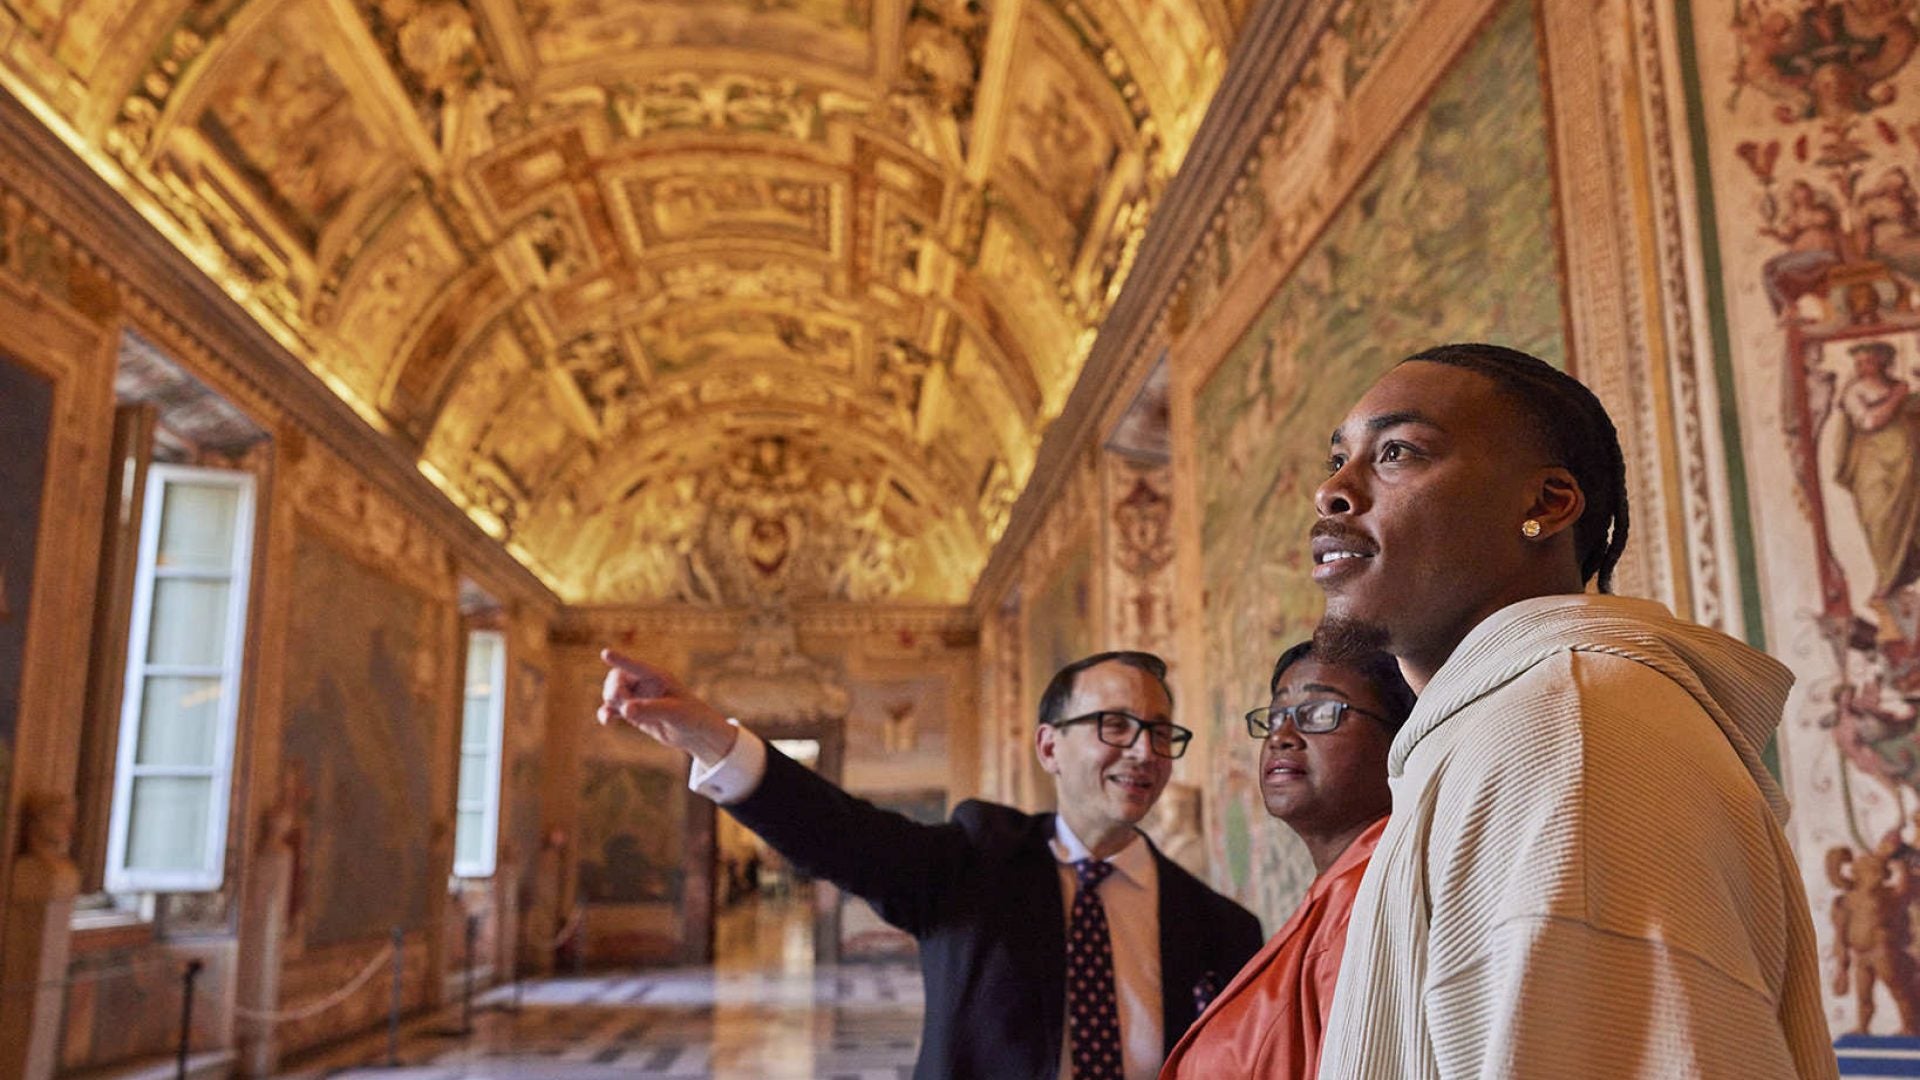 NFL Star Justin Jefferson Went On The Sweetest Mother-Son Trip To Rome